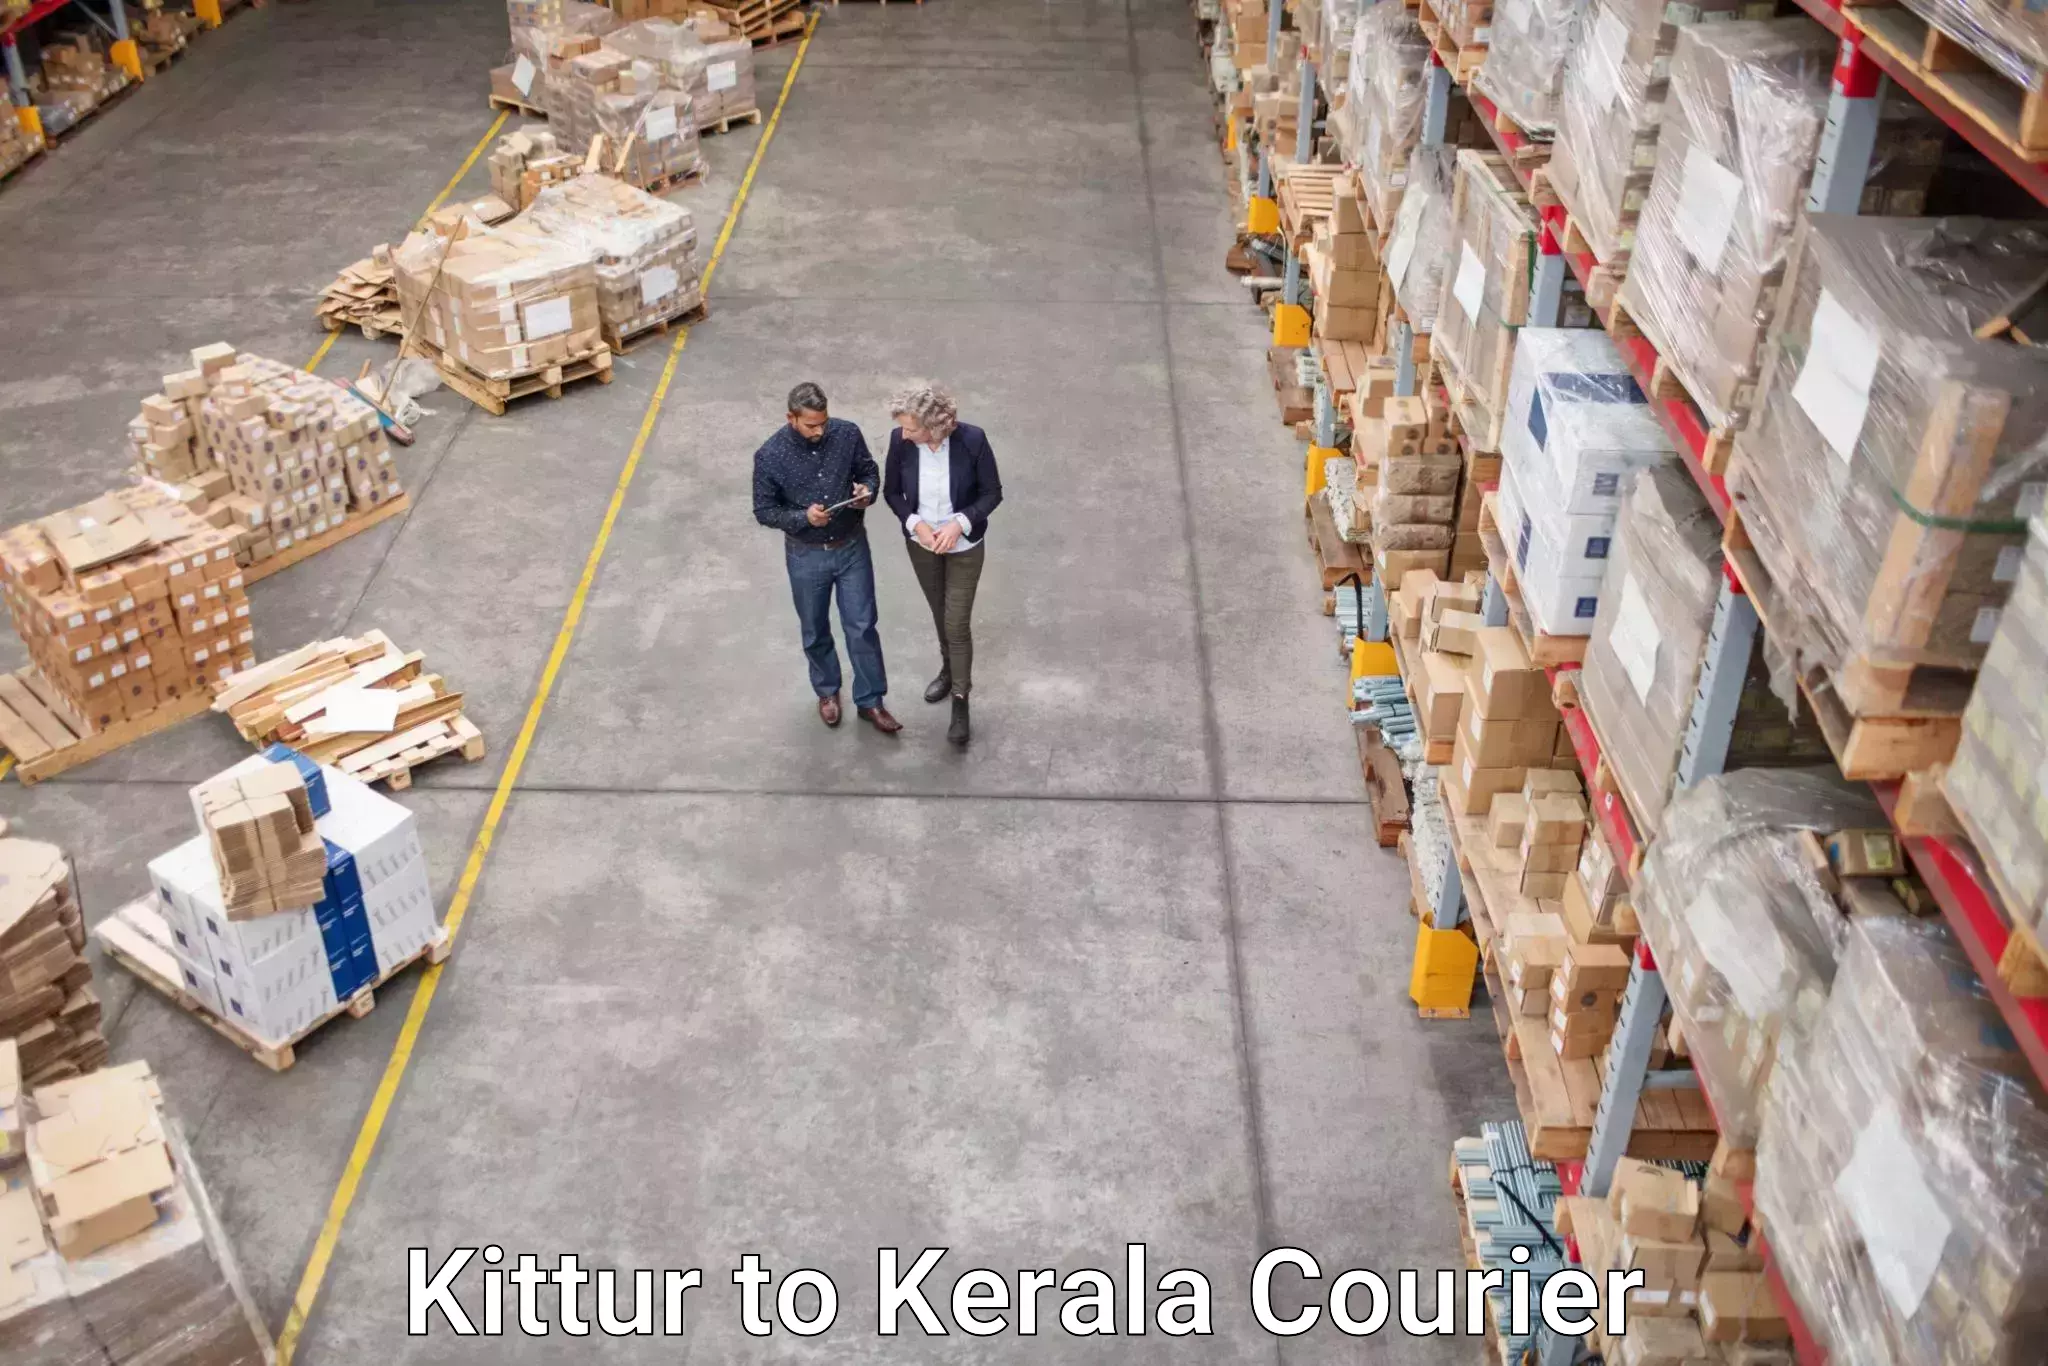 Courier service innovation Kittur to Kerala